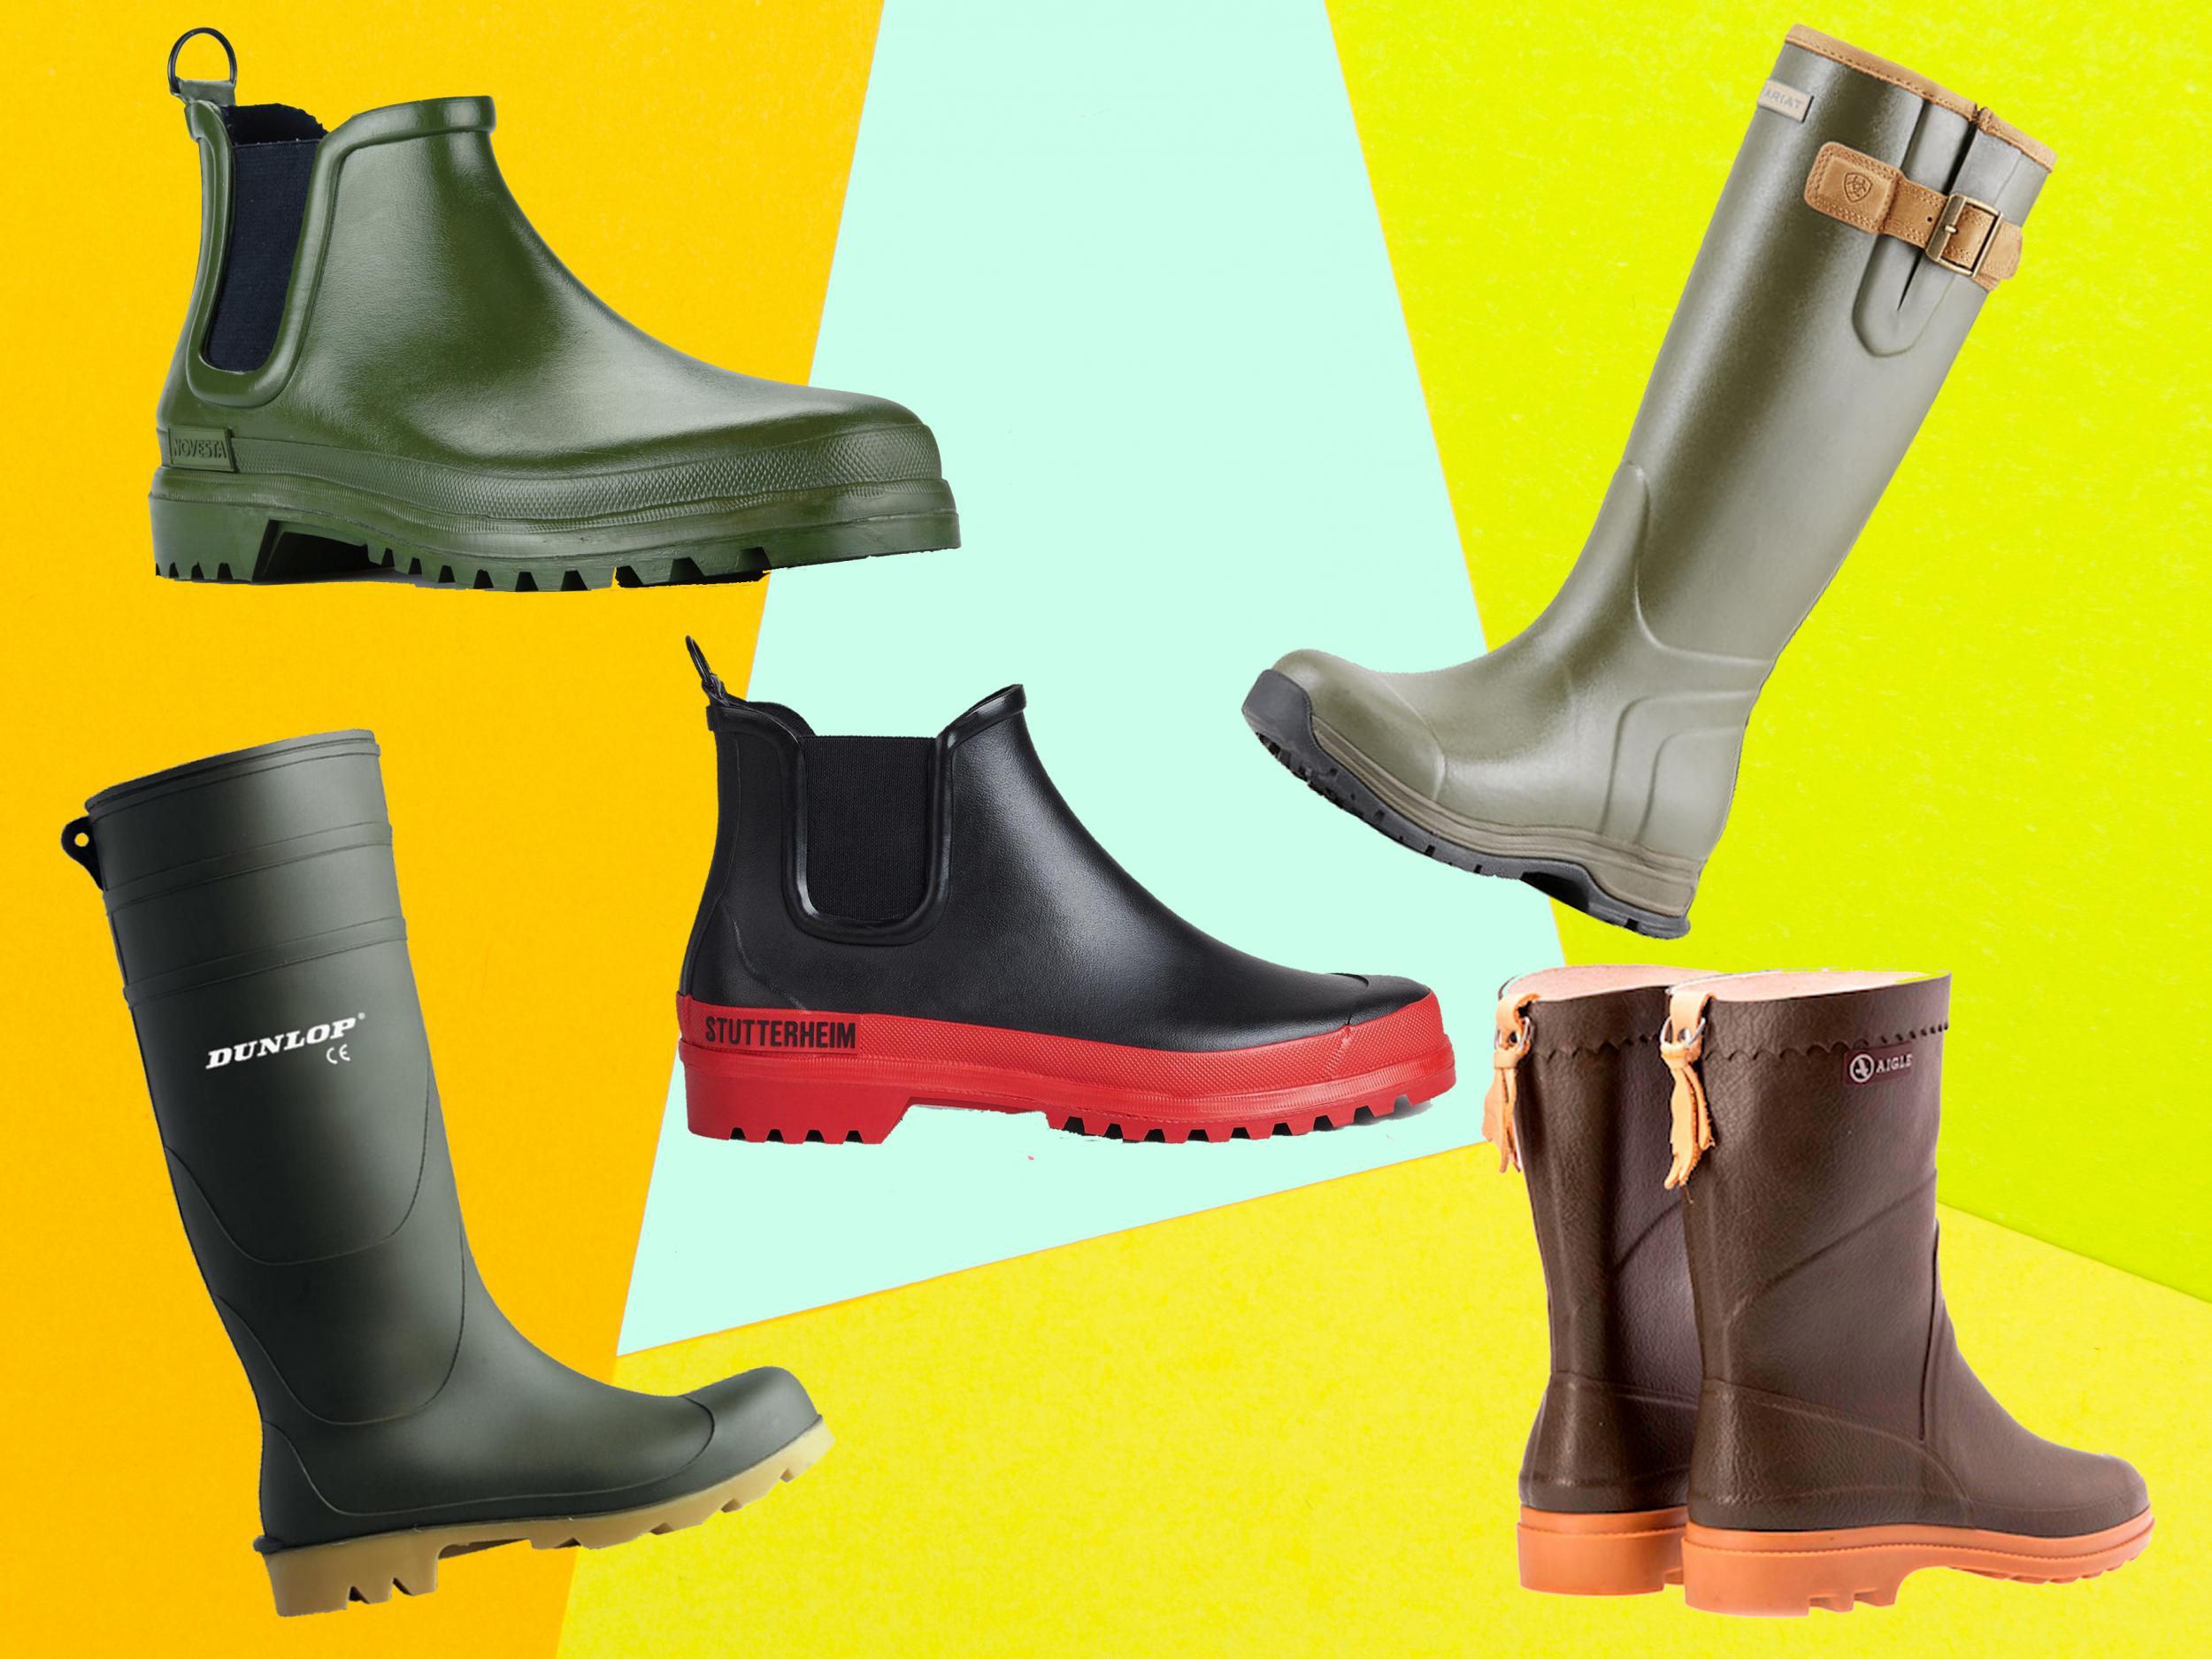 Best festival wellies that are 